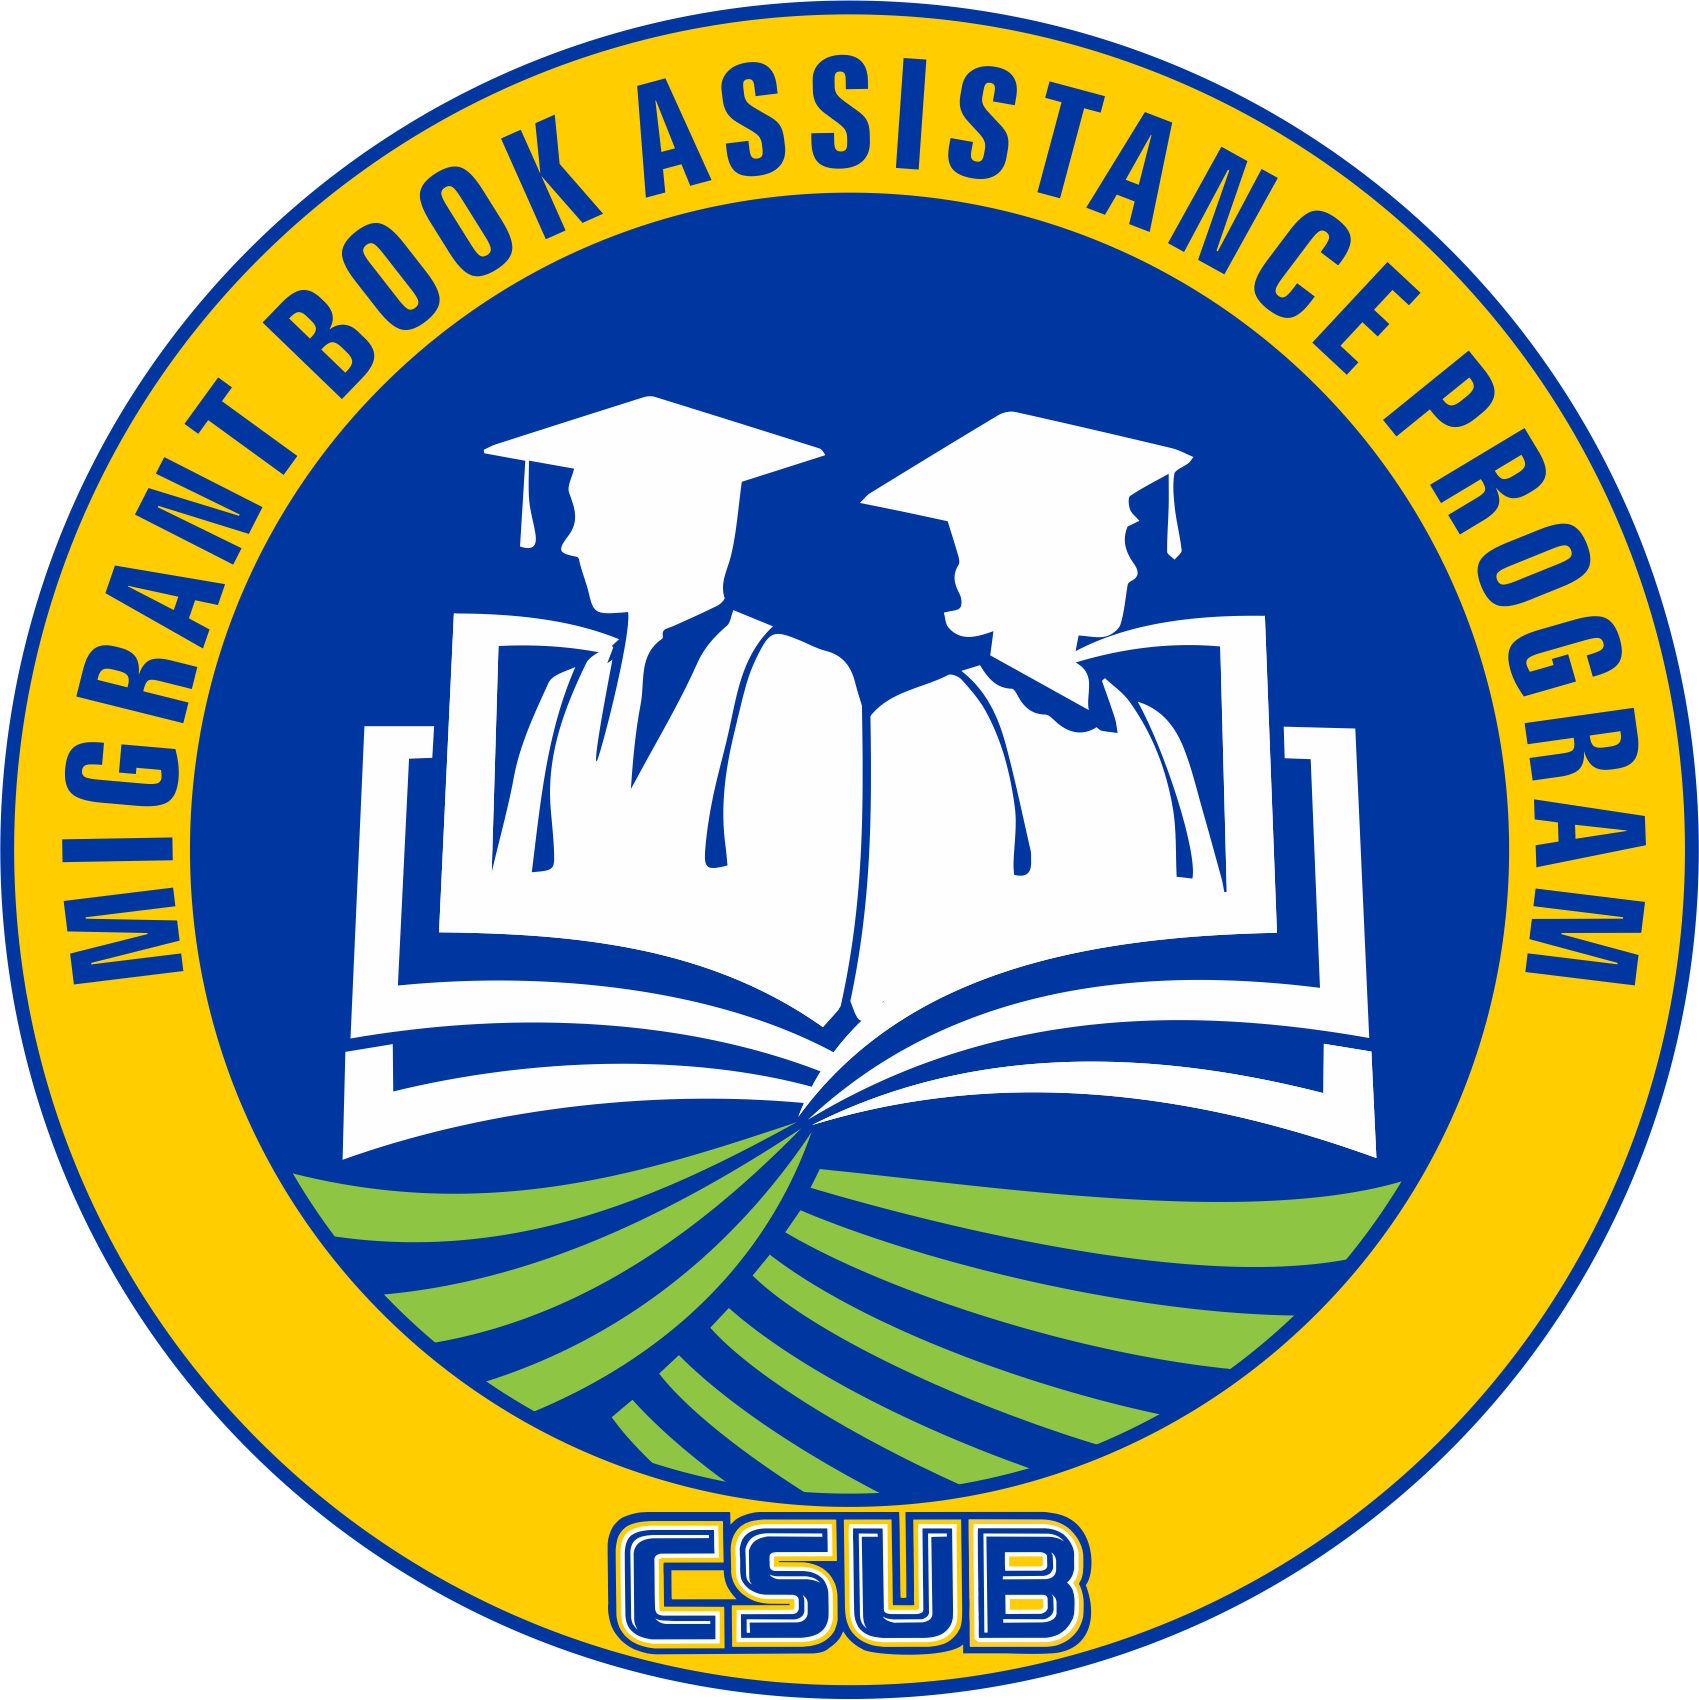 CSUB approved banner photo